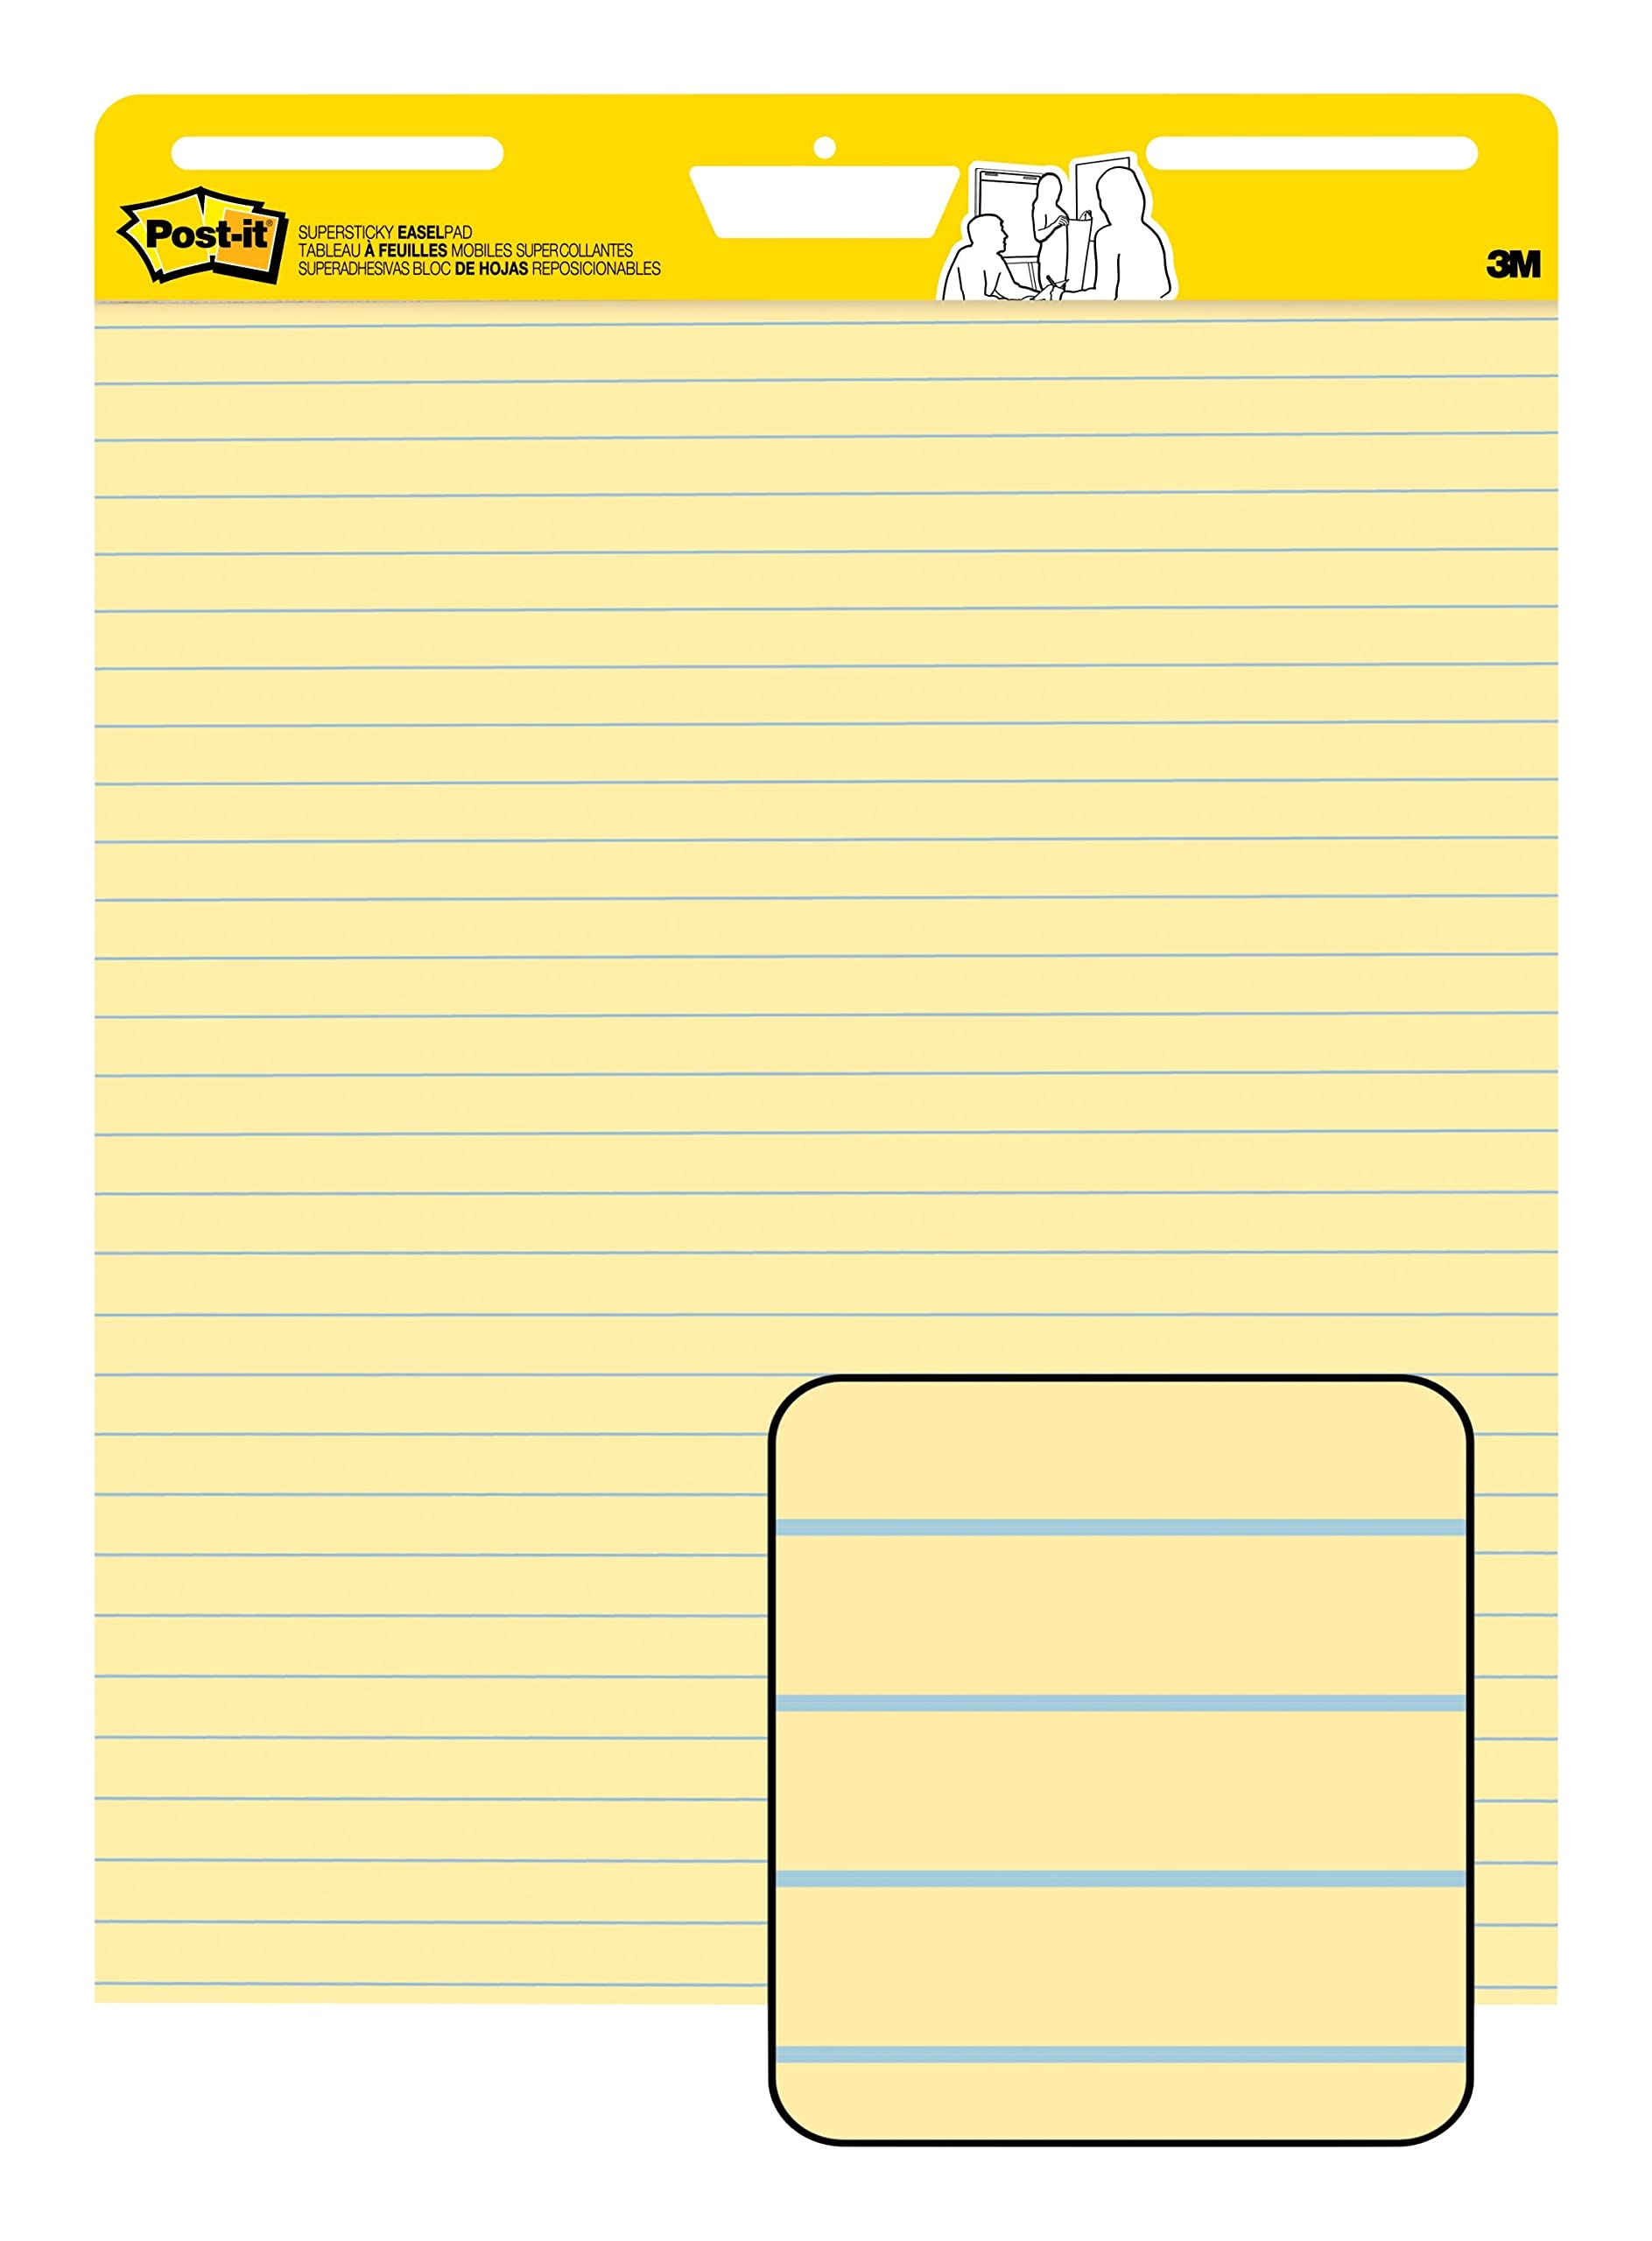 Post-it Super Sticky Easel Pad, 25 in x 30 in Sheets, Yellow Paper with  Lines